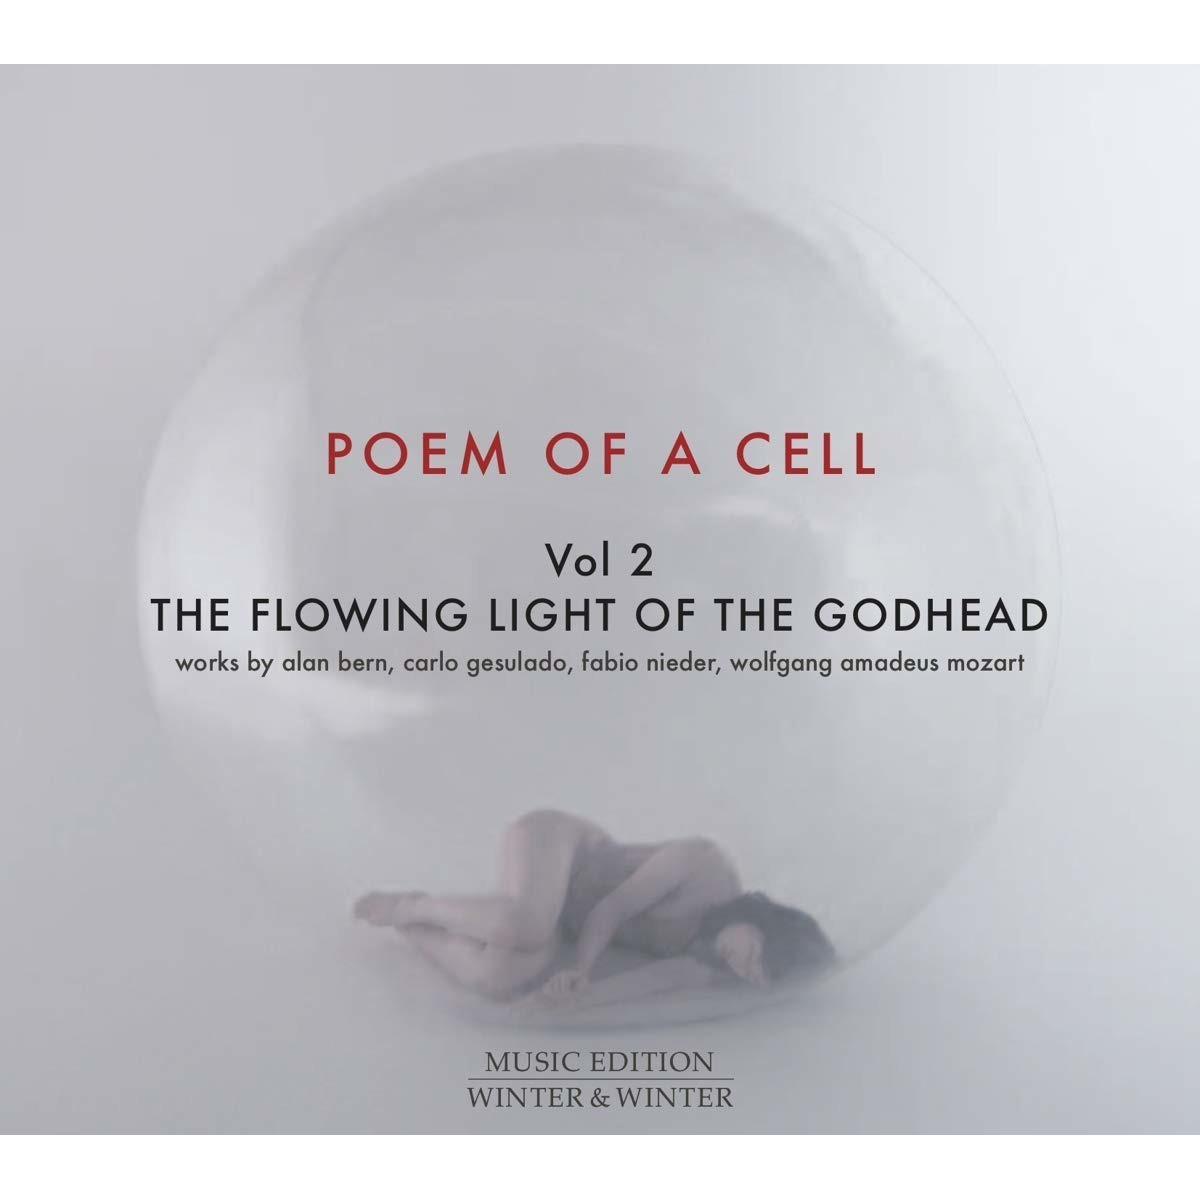 POEM OF A CELL VOL 2 - THE FLOWING LIGHT